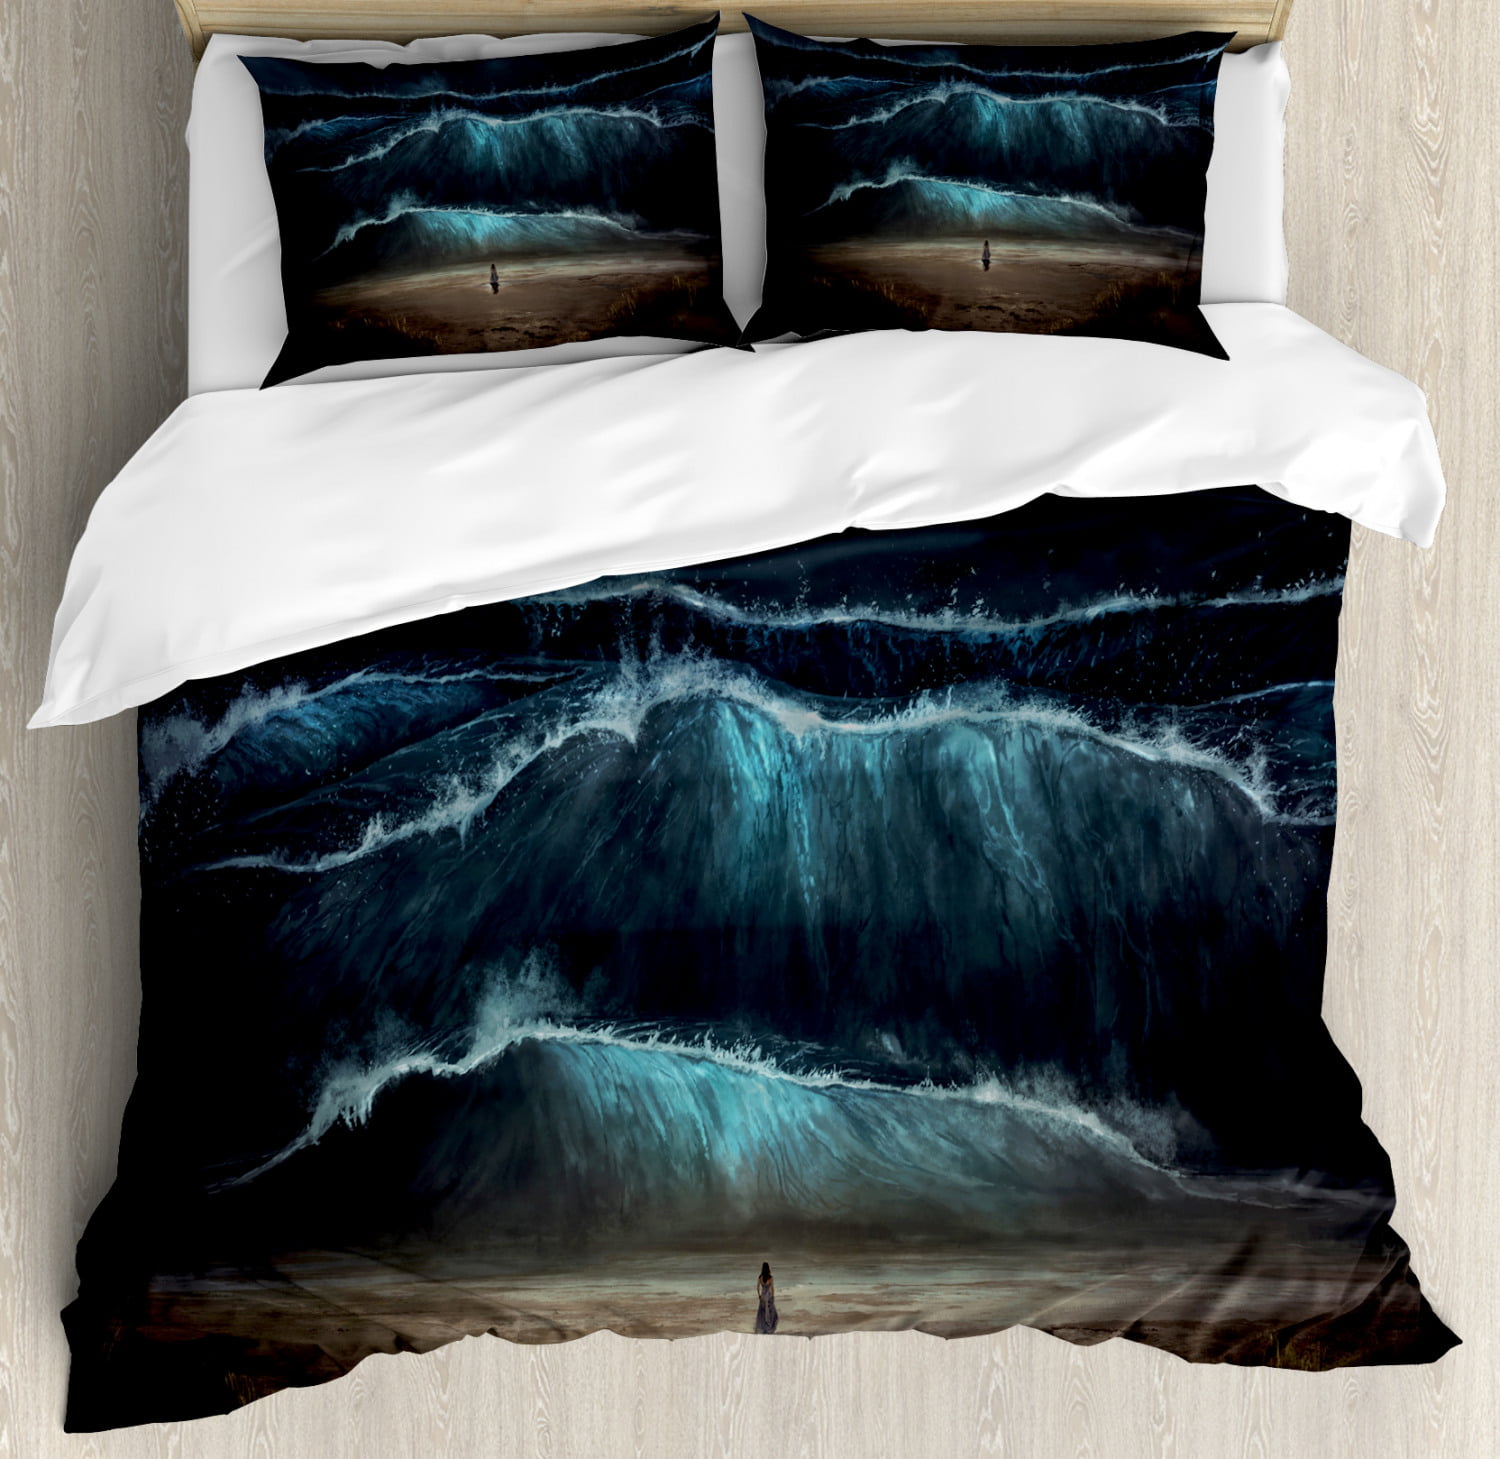 Night Ocean Duvet Cover Set King Size, Can You Use A Duvet Cover Alone